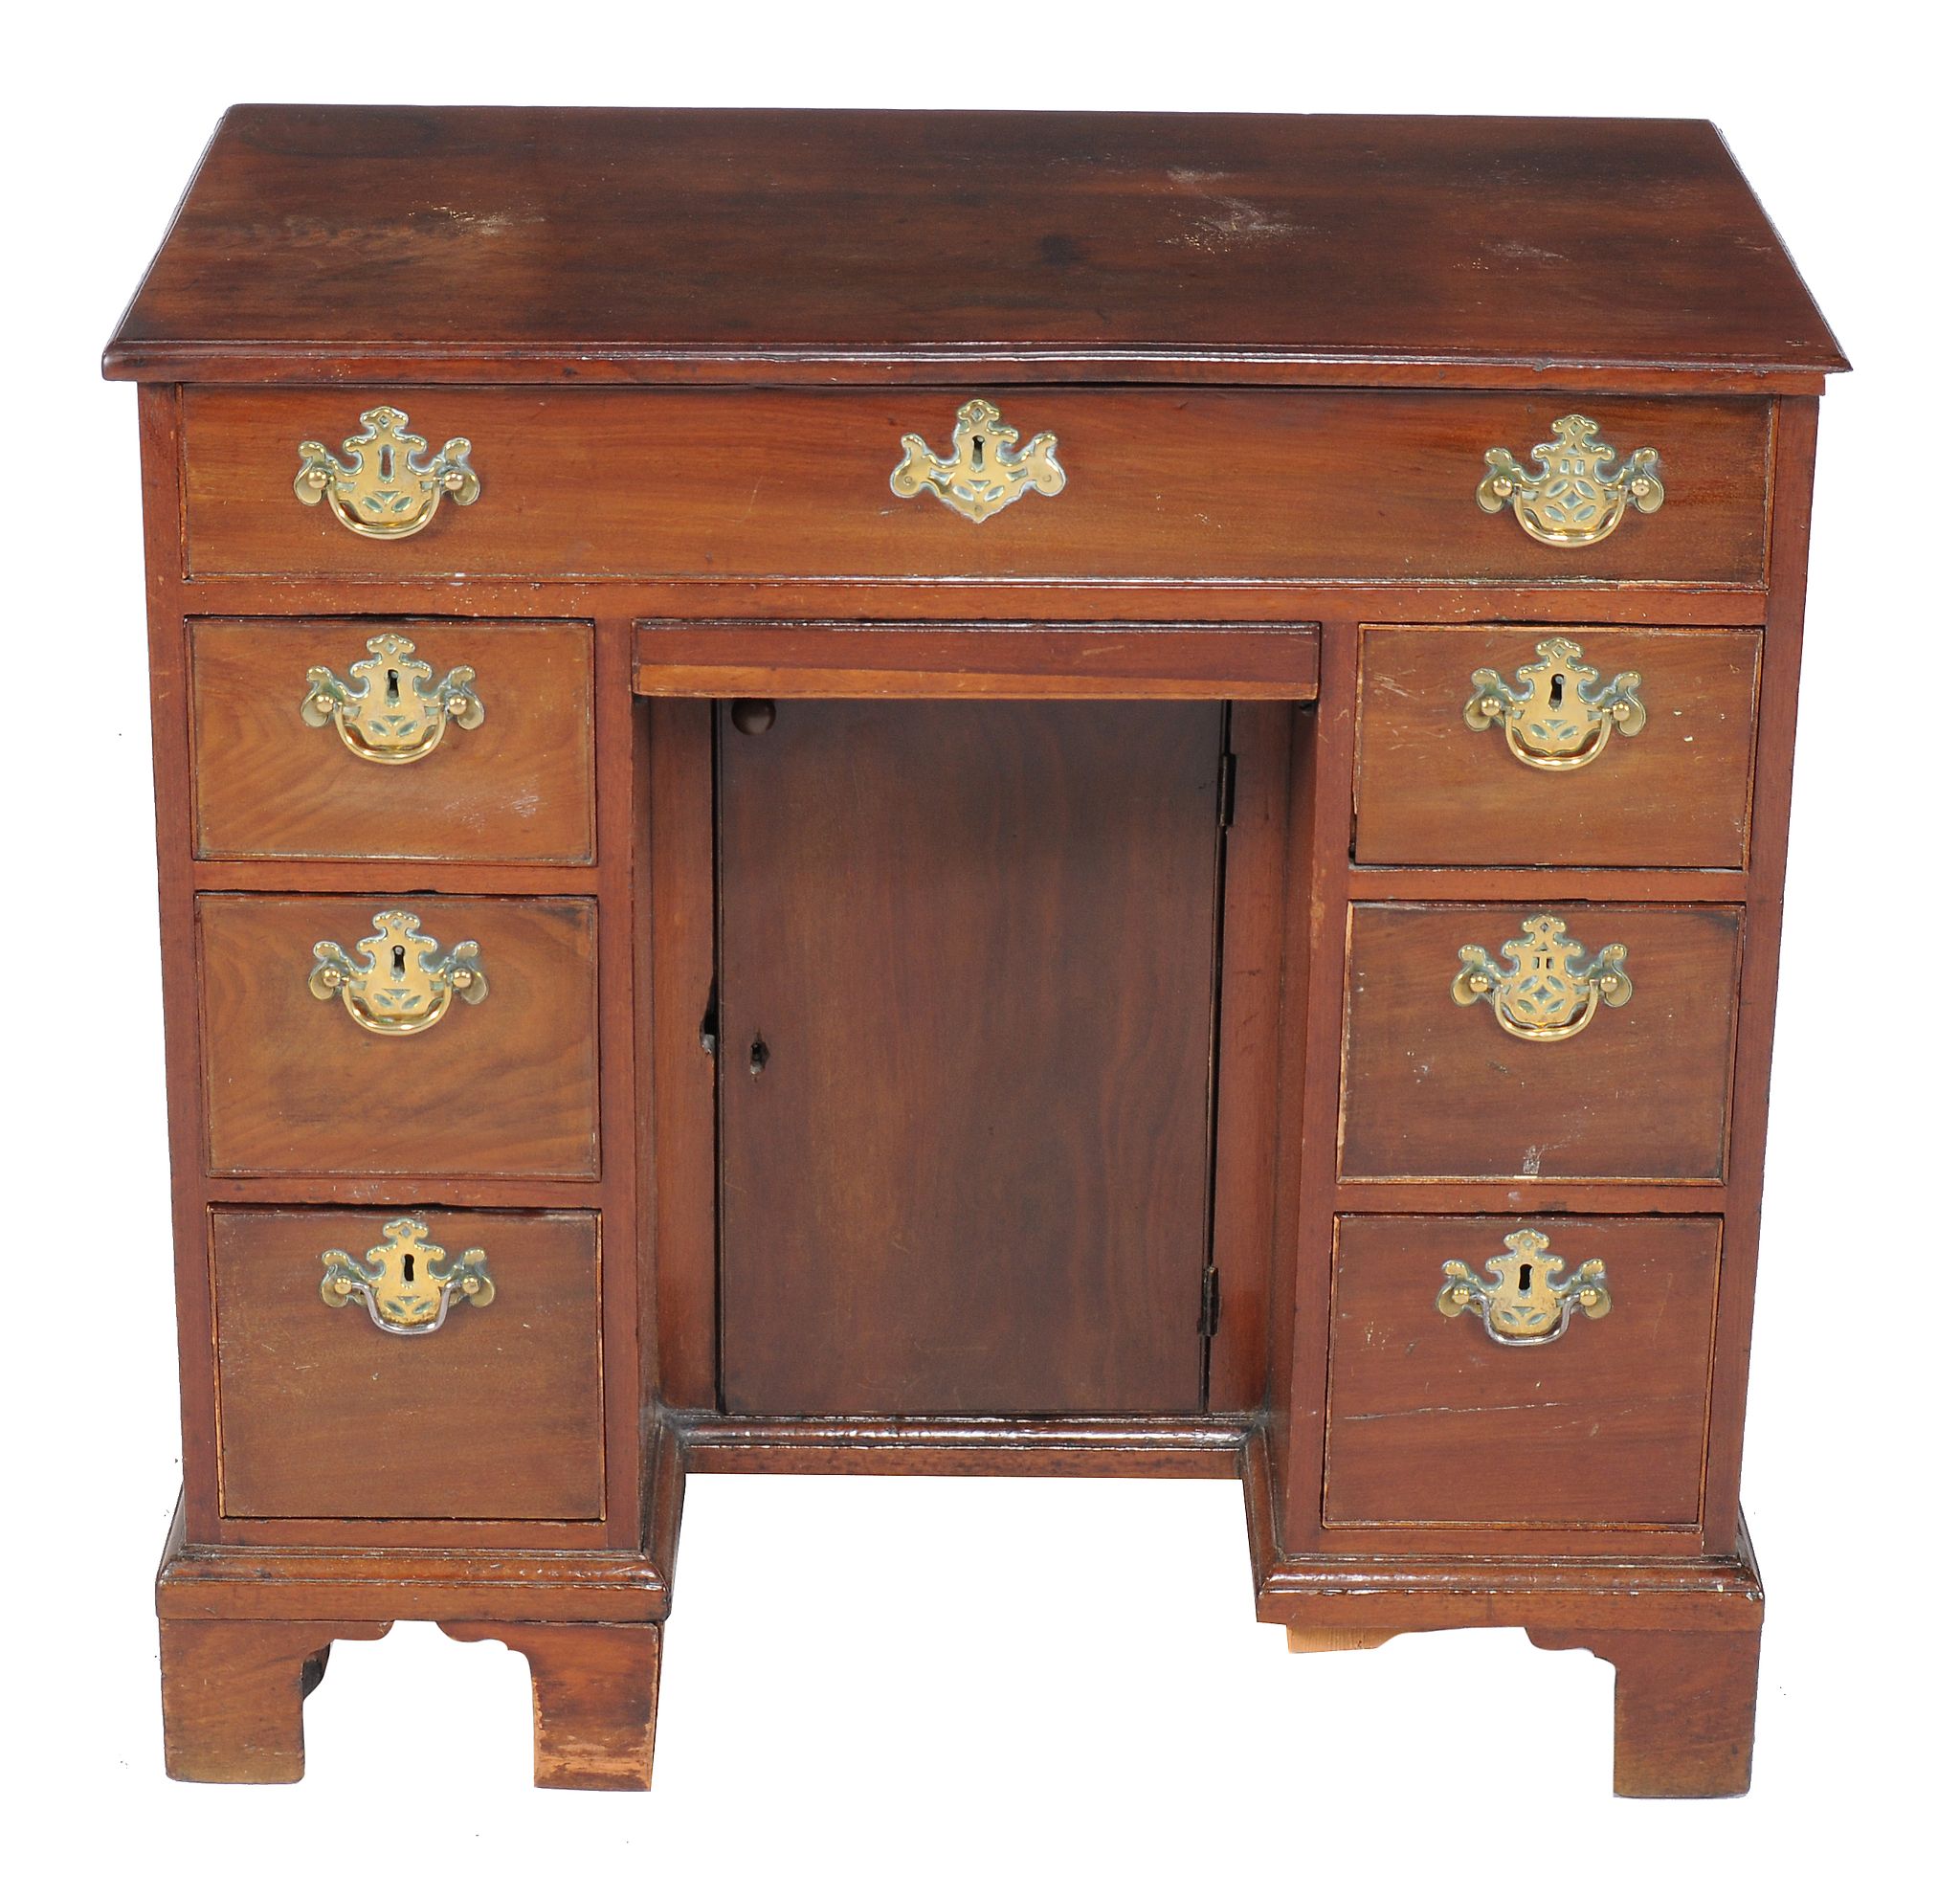 A George III mahogany kneehole desk, circa 1800, with an arrangement of seven drawers and a shallow